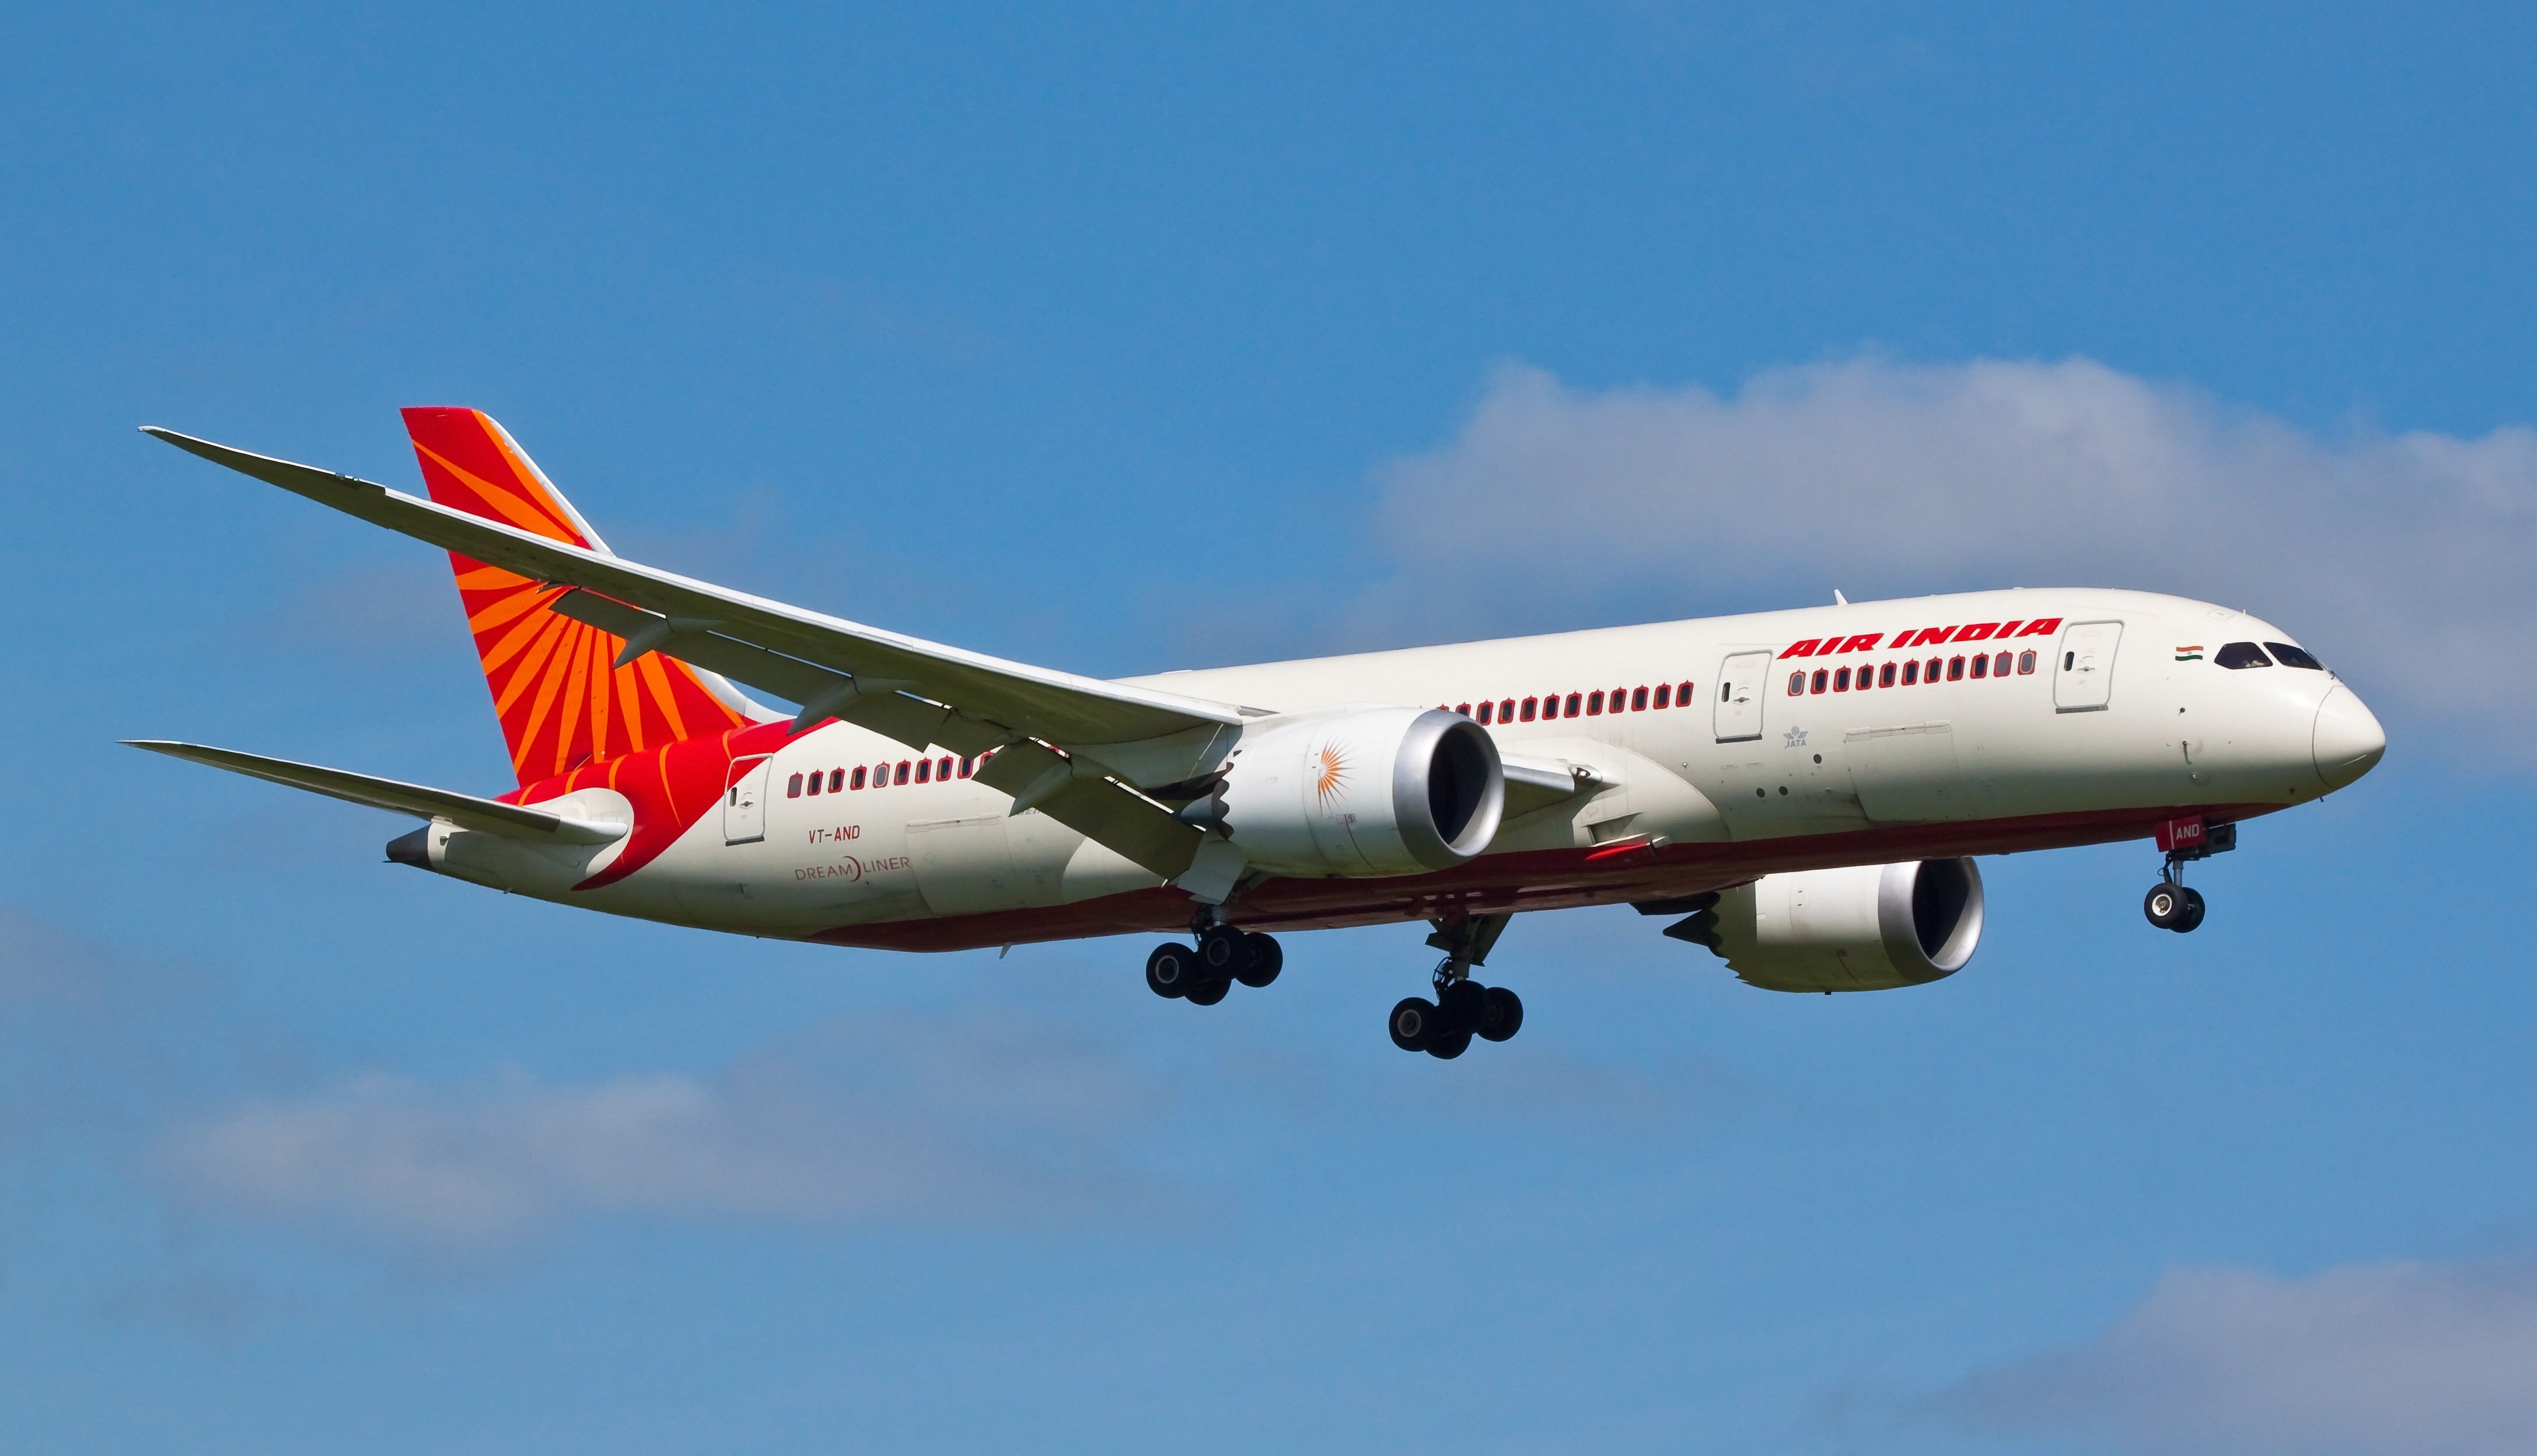 Air India passengers can journey throughout 5,600 German practice stations with a single ticket